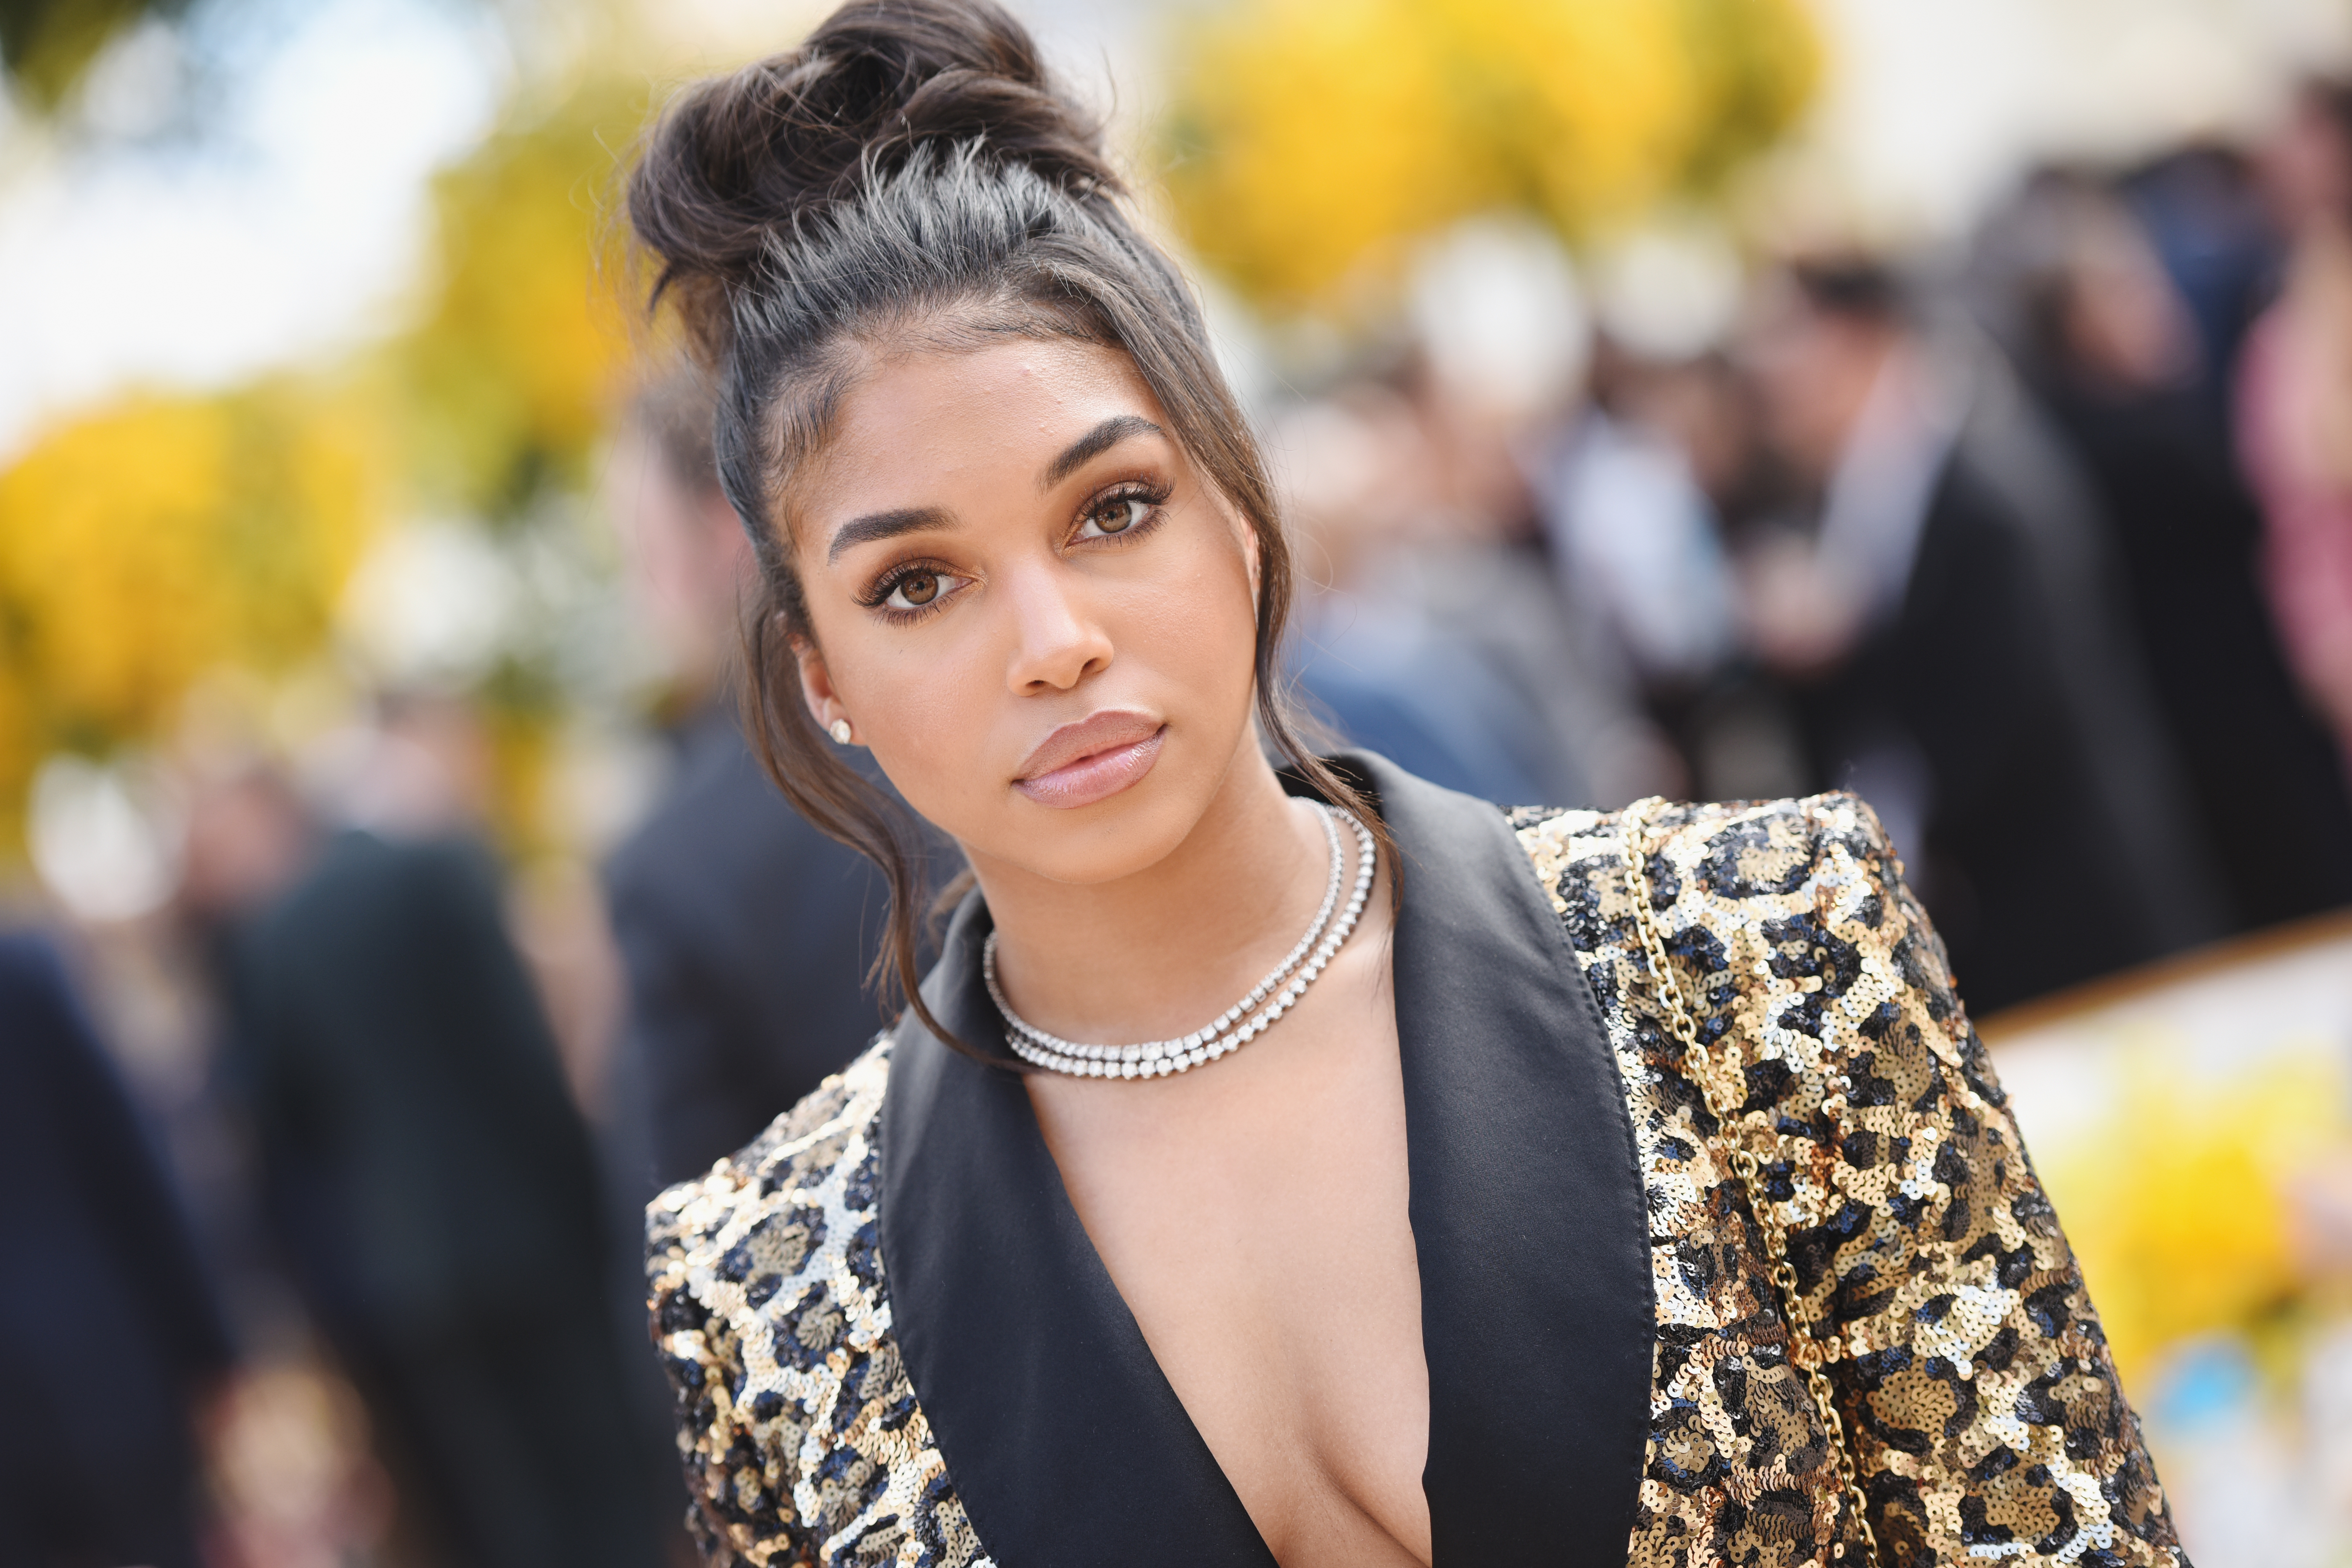 Lori Harvey Says That She “Almost Got Married Very Young”